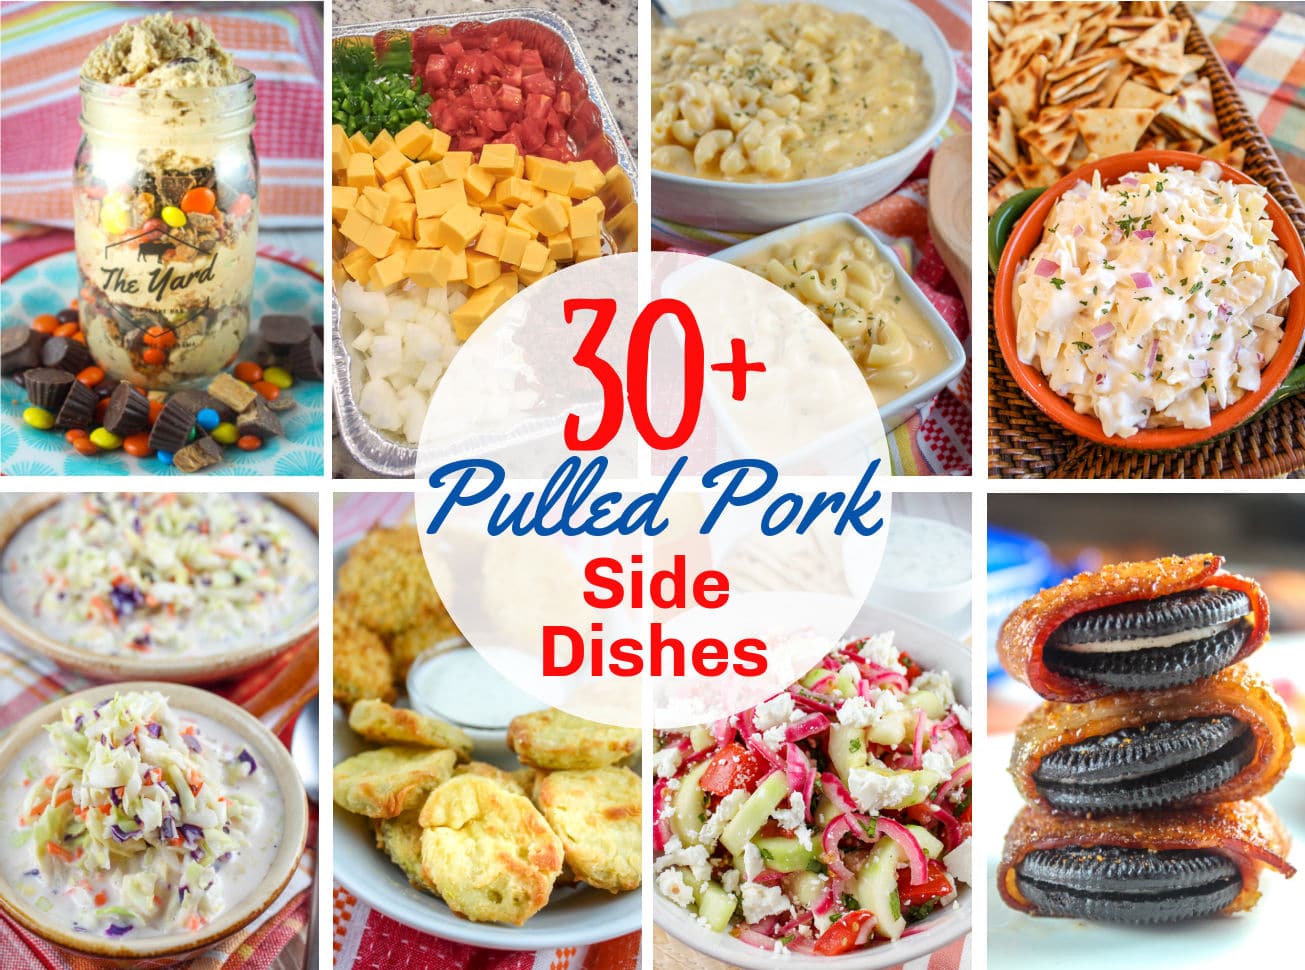 What to Serve with Pulled Pork: 32+ favorite side dishes! - The Food Hussy